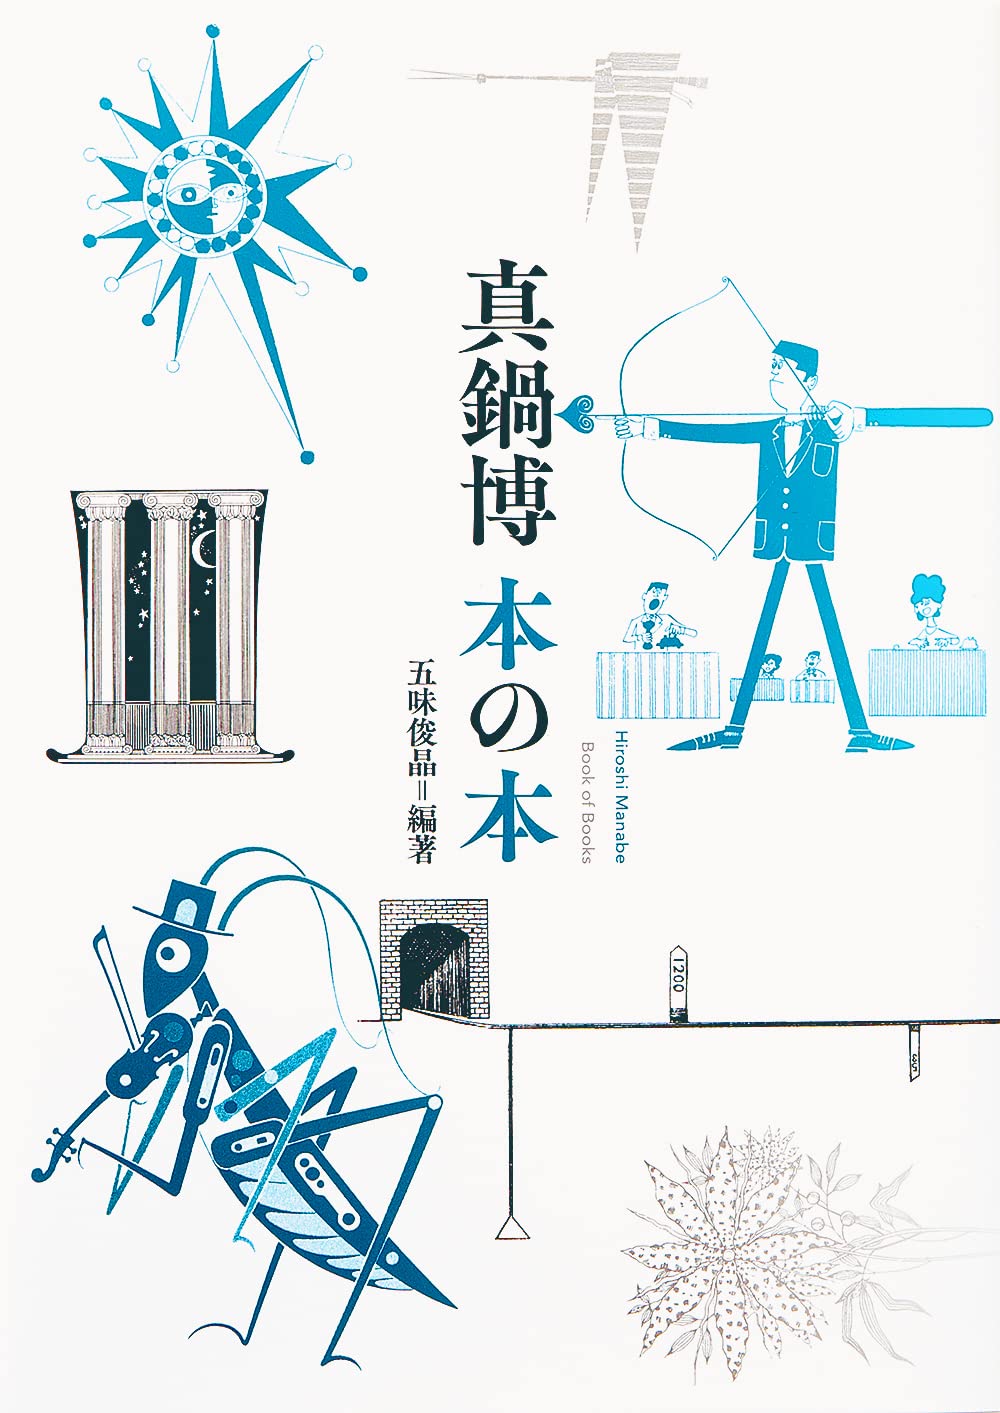 Hiroshi Manabe: The Book of Books